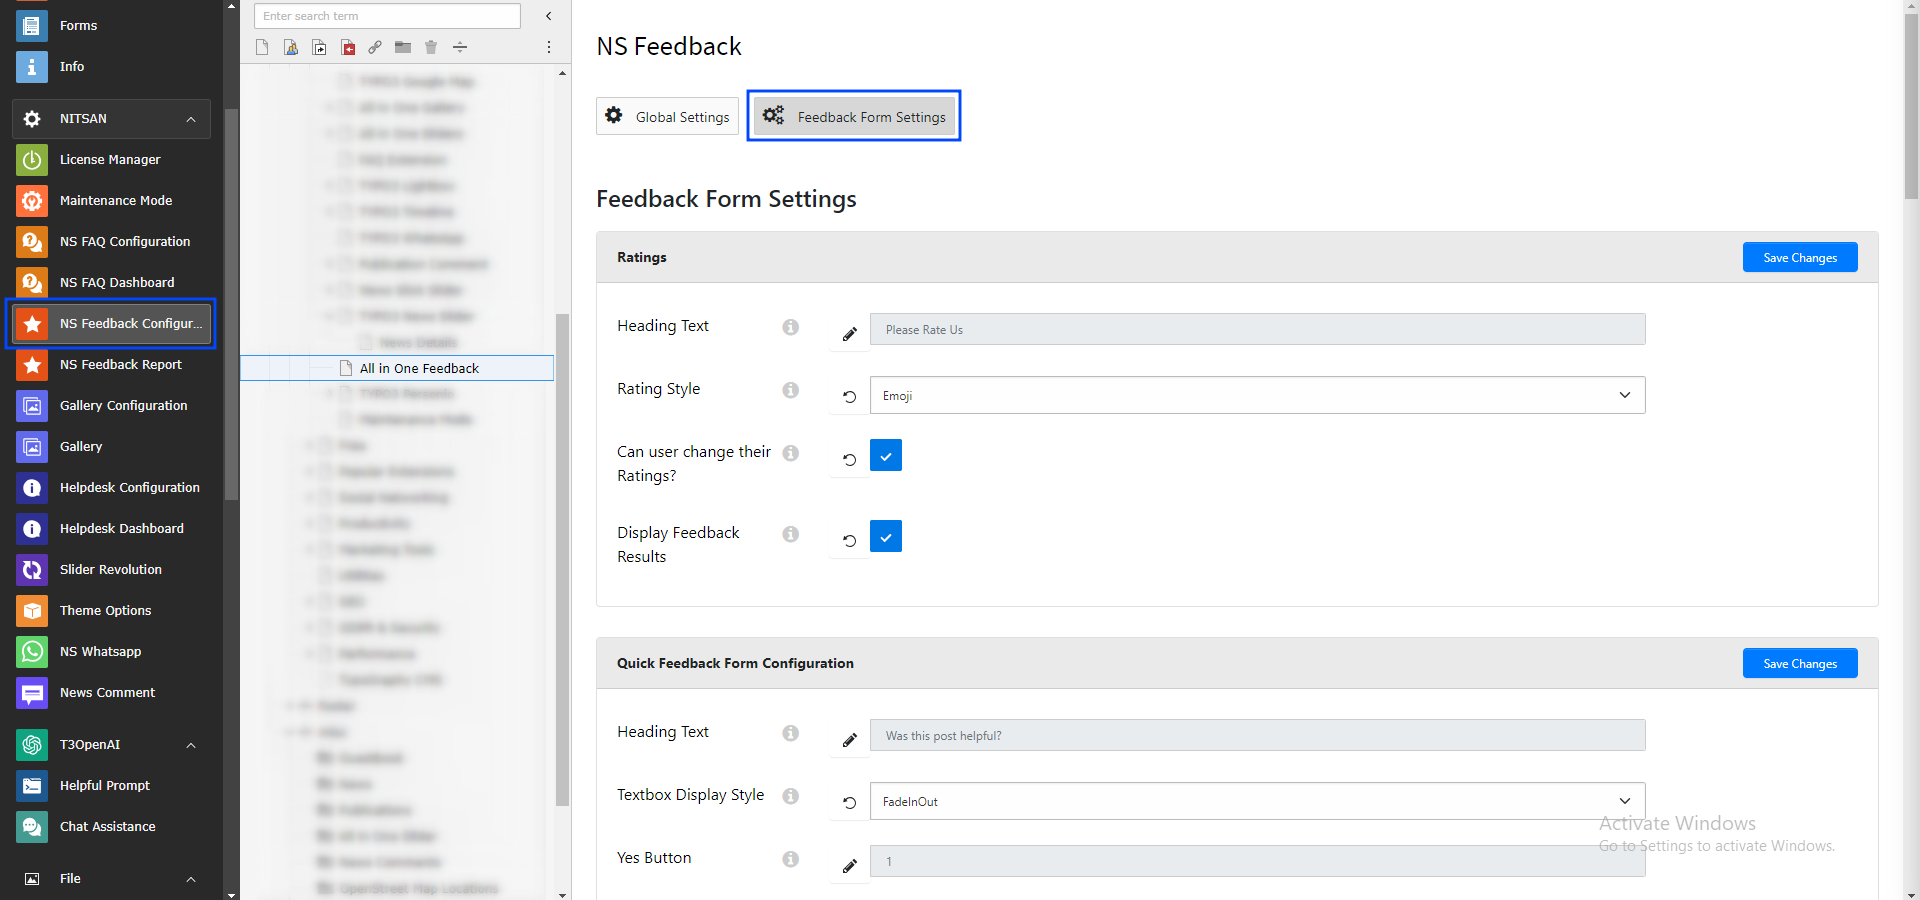 How to configure Feedback Forms?